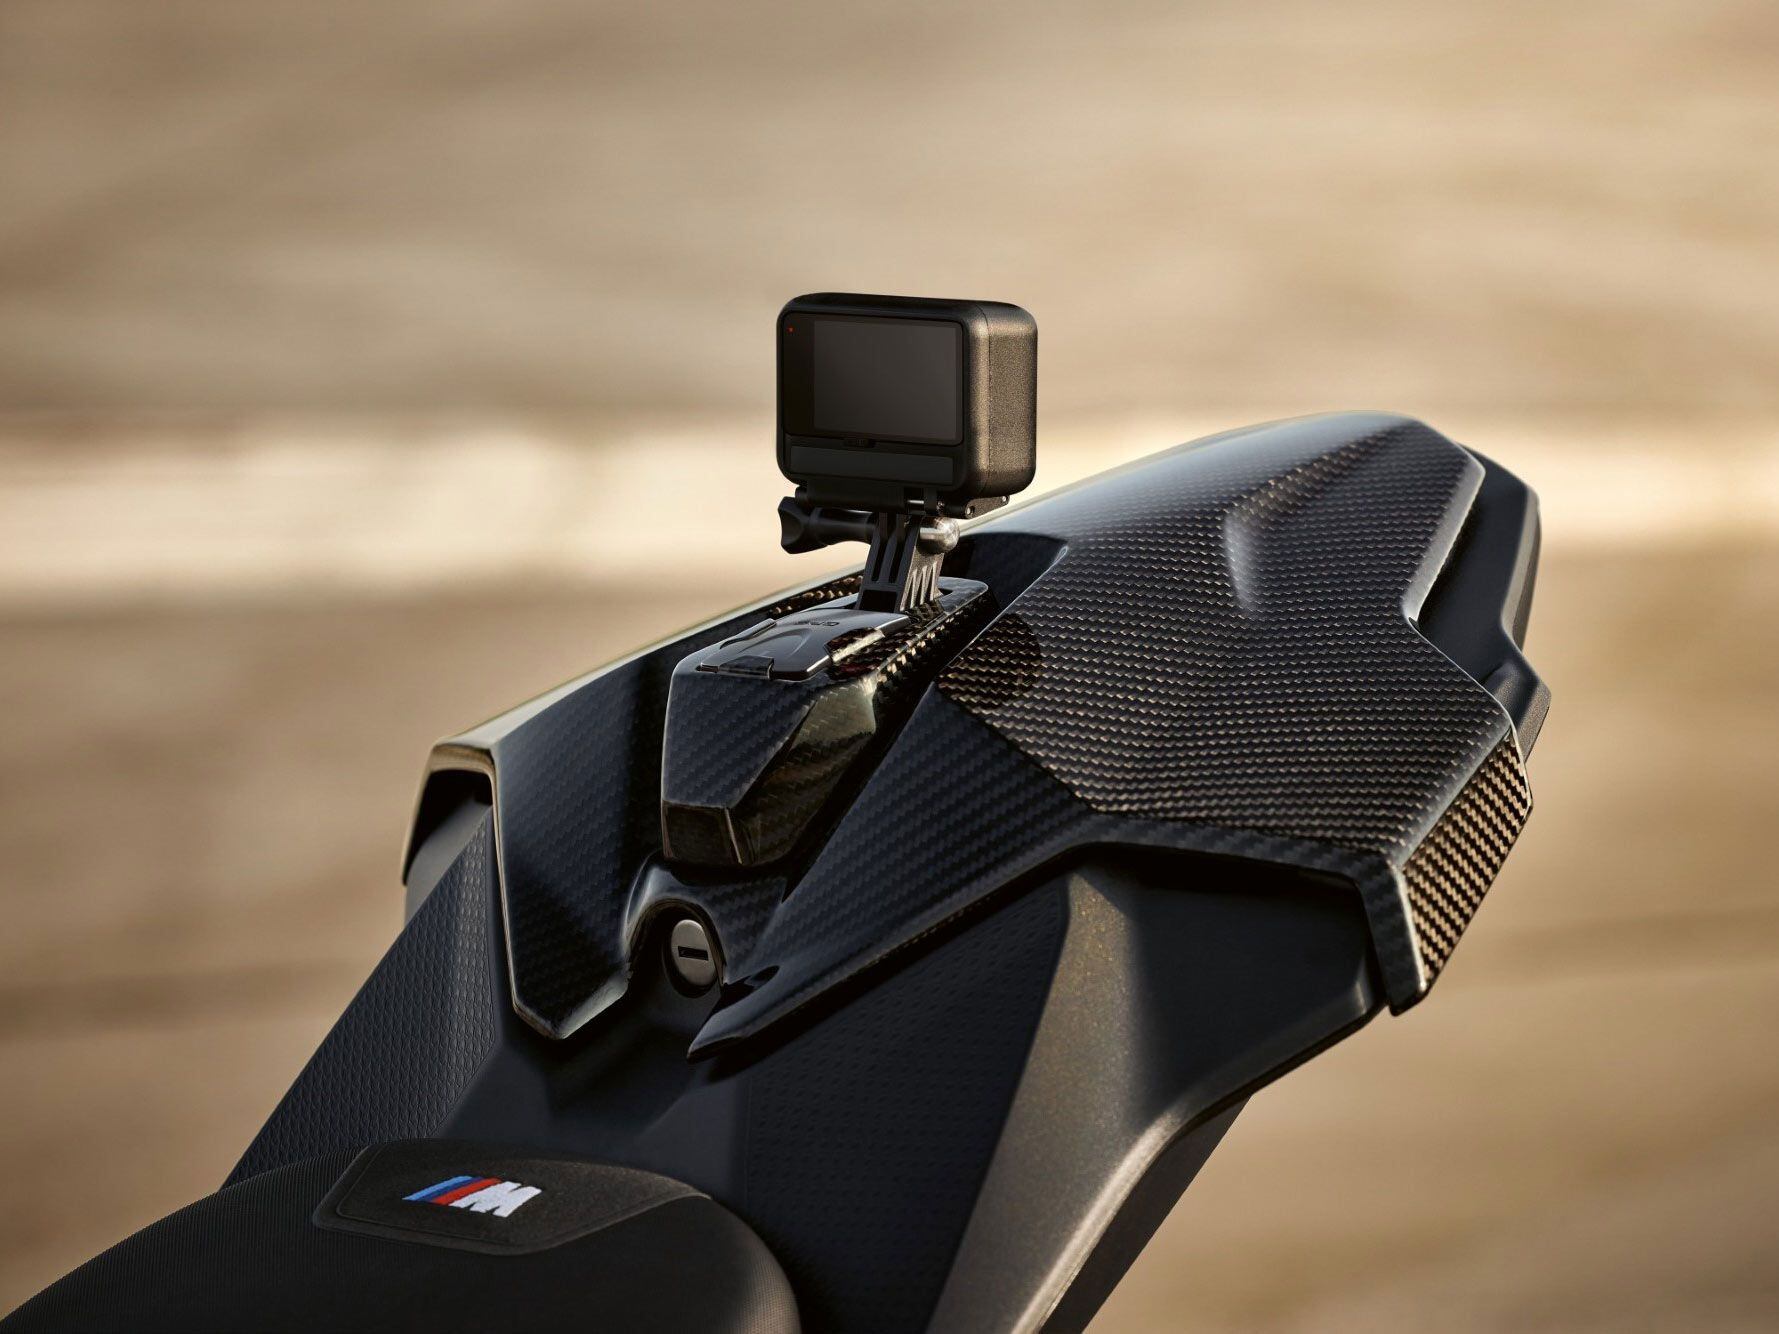 An optional GoPro mount is available.